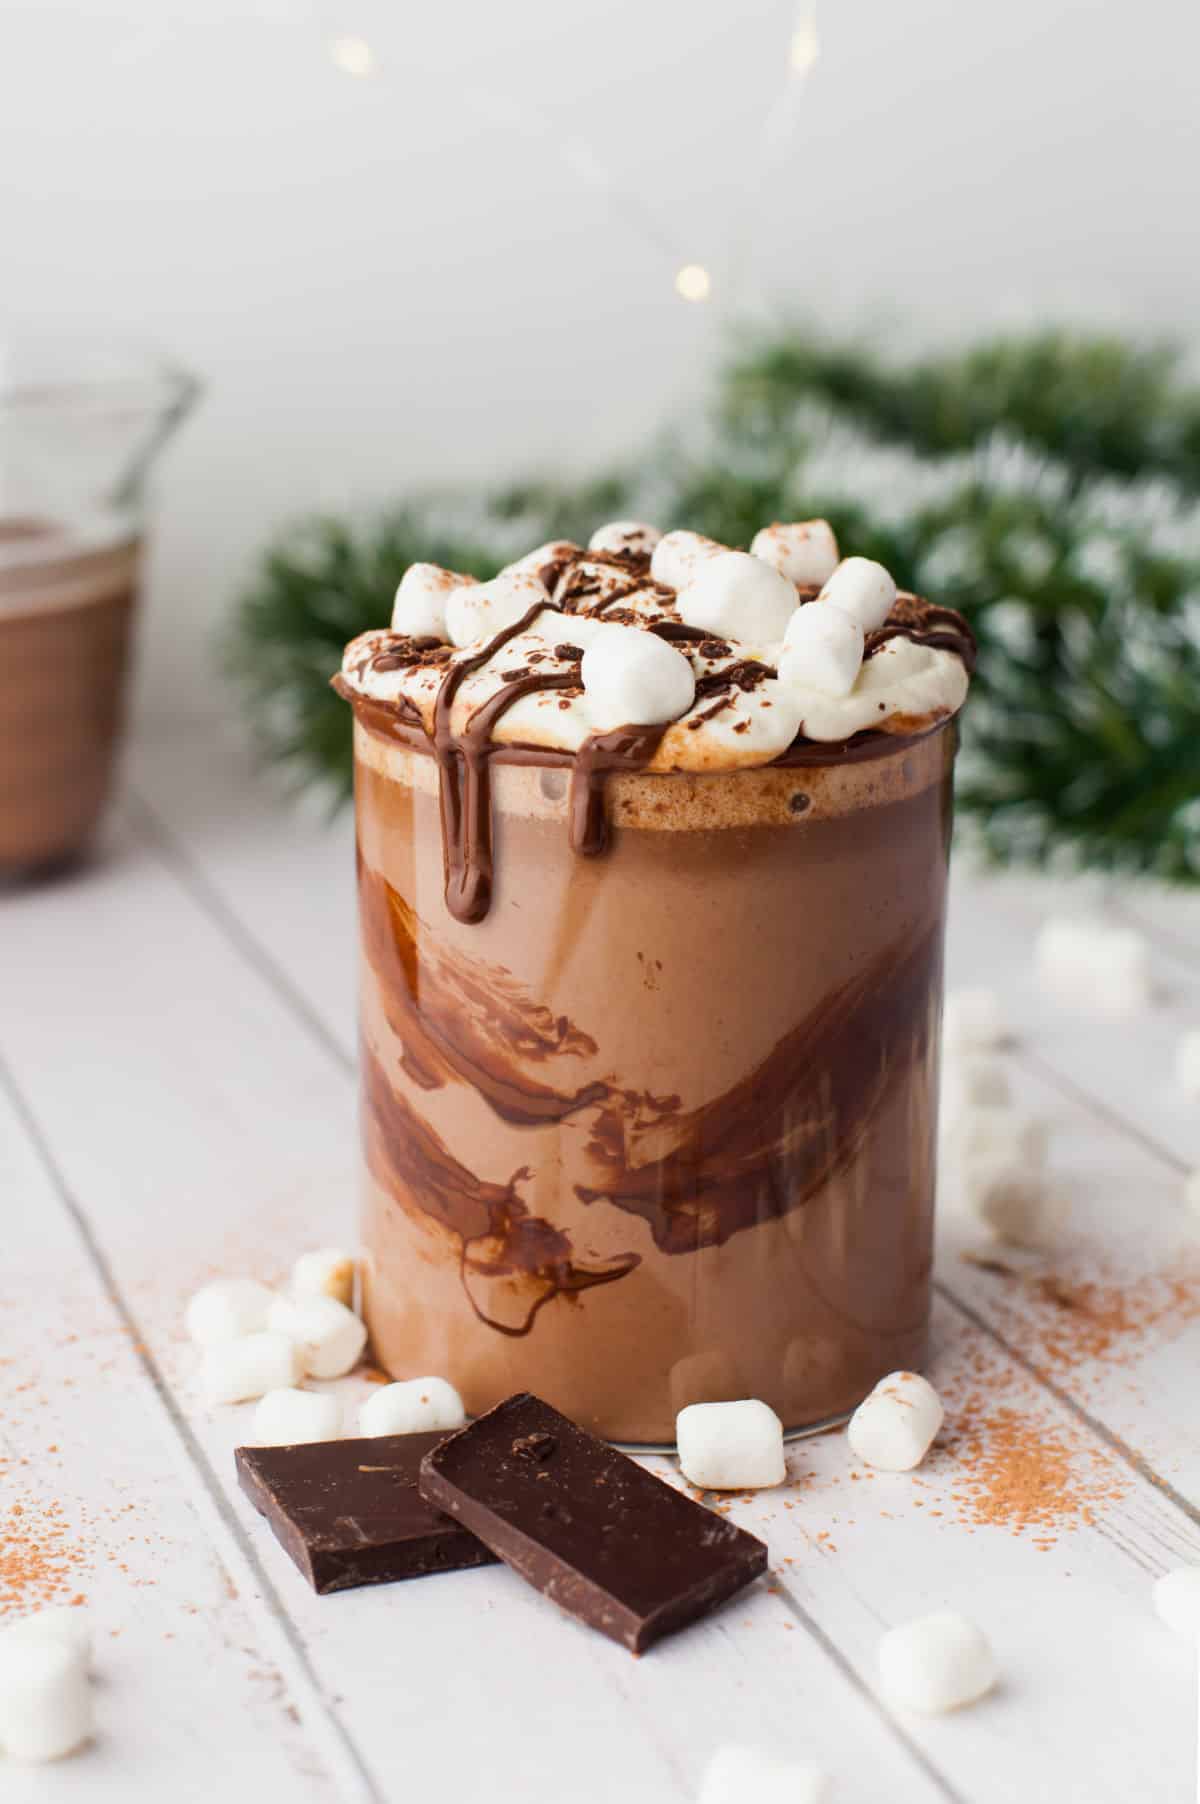 A glass of crock pot hot chocolate surrounded by chocolate bars and marshmallows.